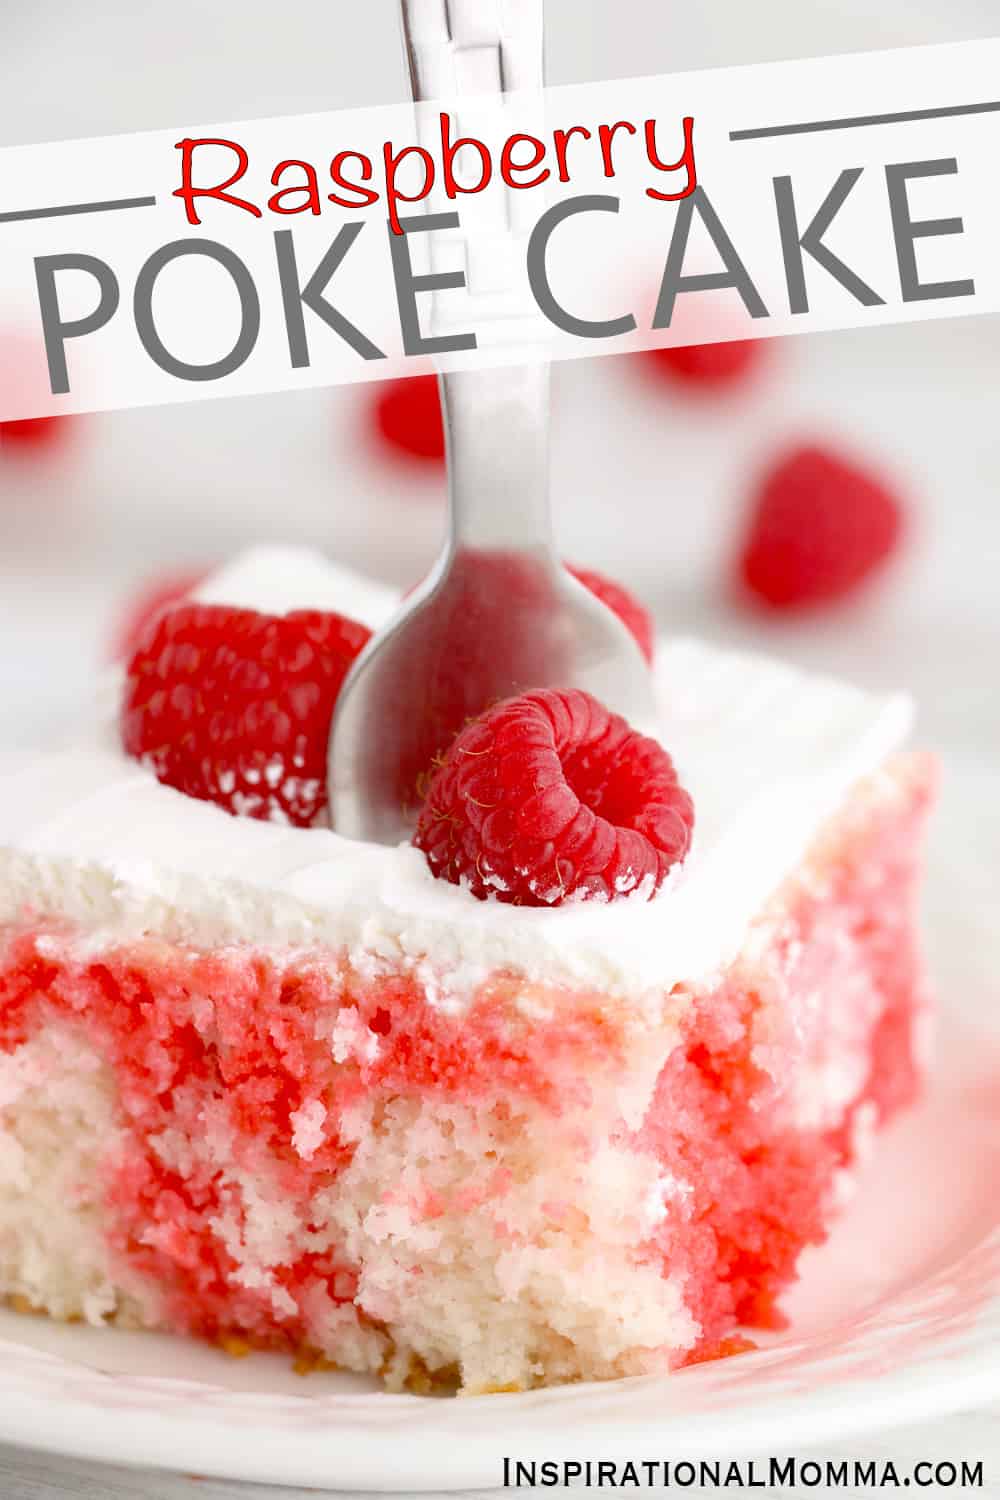 This Raspberry poke cake is made with a white cake mix, jello, and whipped topping.  Raspberry jellow cake is easy to make, moist, and delicious! 

#inspirationalmomma #raspberryjellocake #raspberrypokecake #jellopokecake #pokecake #raspberrycake #easypokecake #cakerecipe #recipe